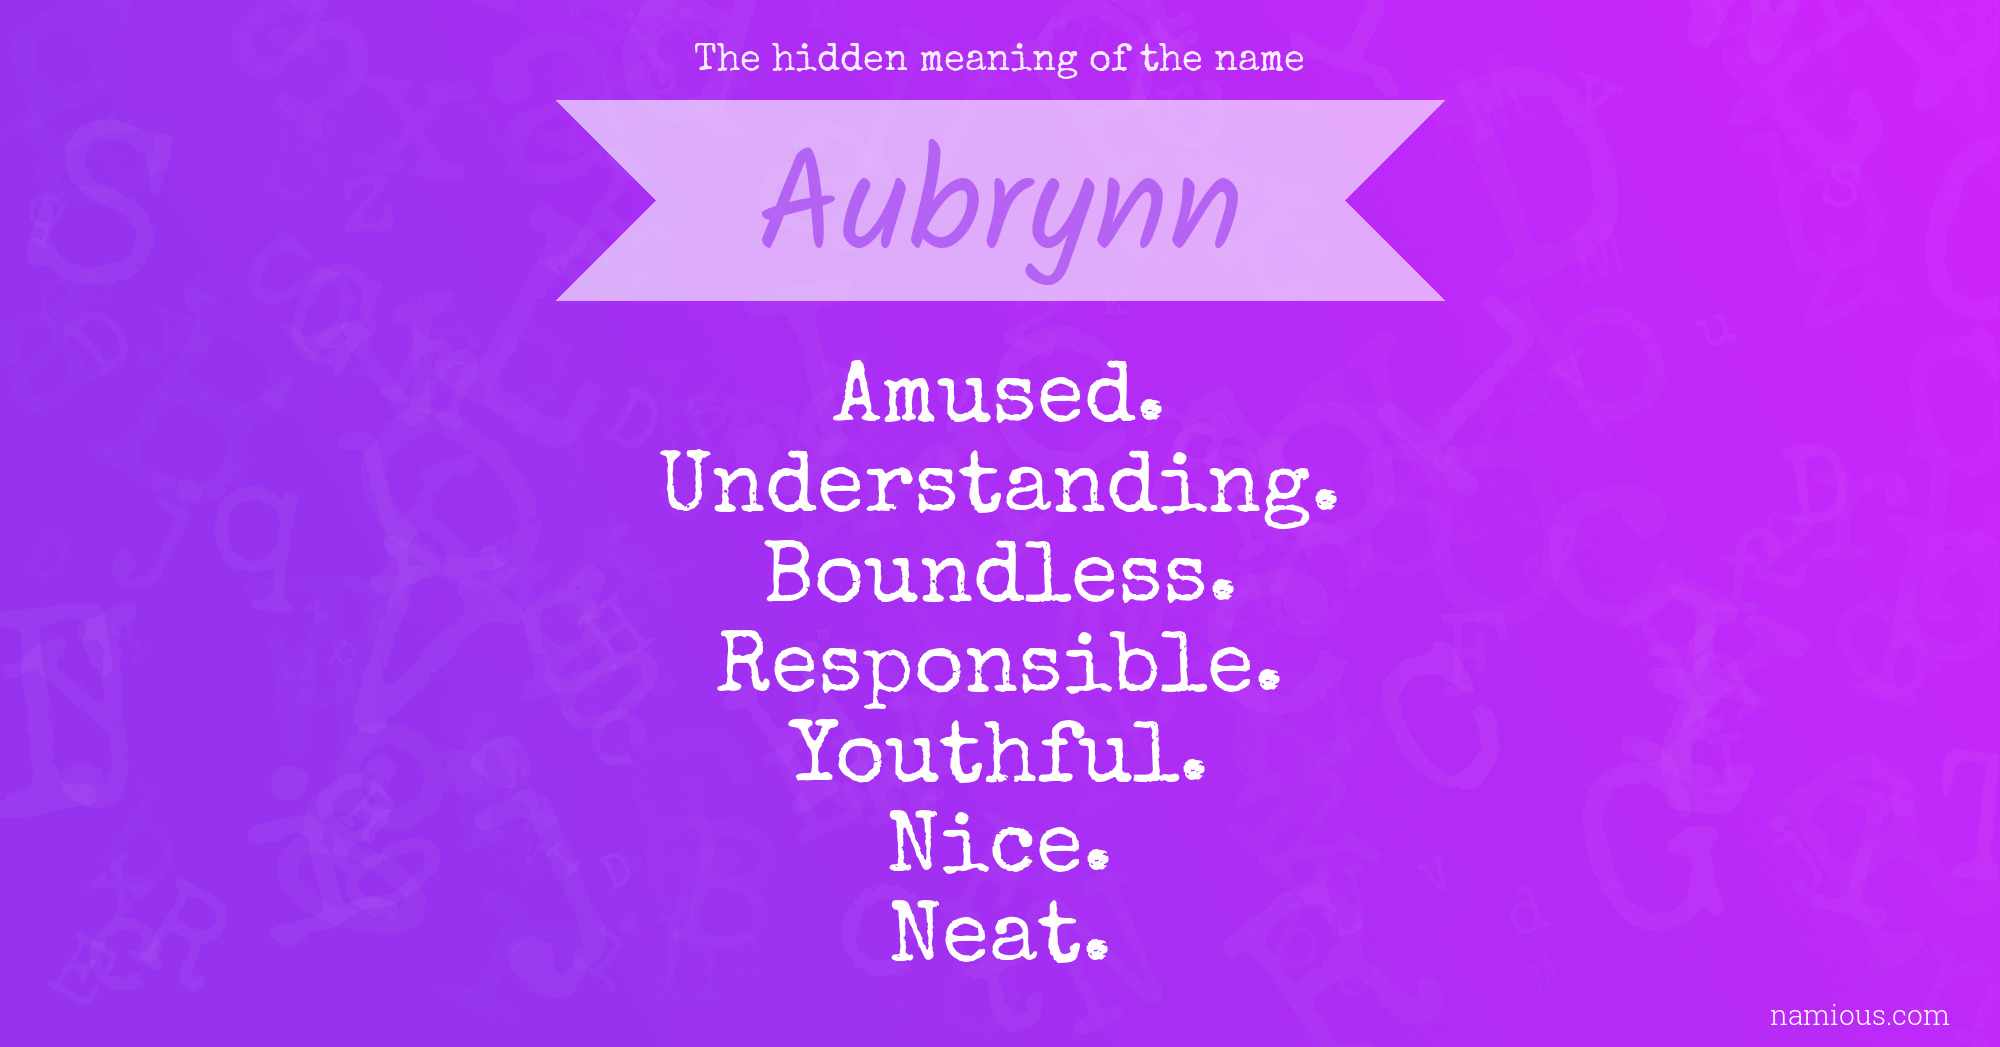 The hidden meaning of the name Aubrynn